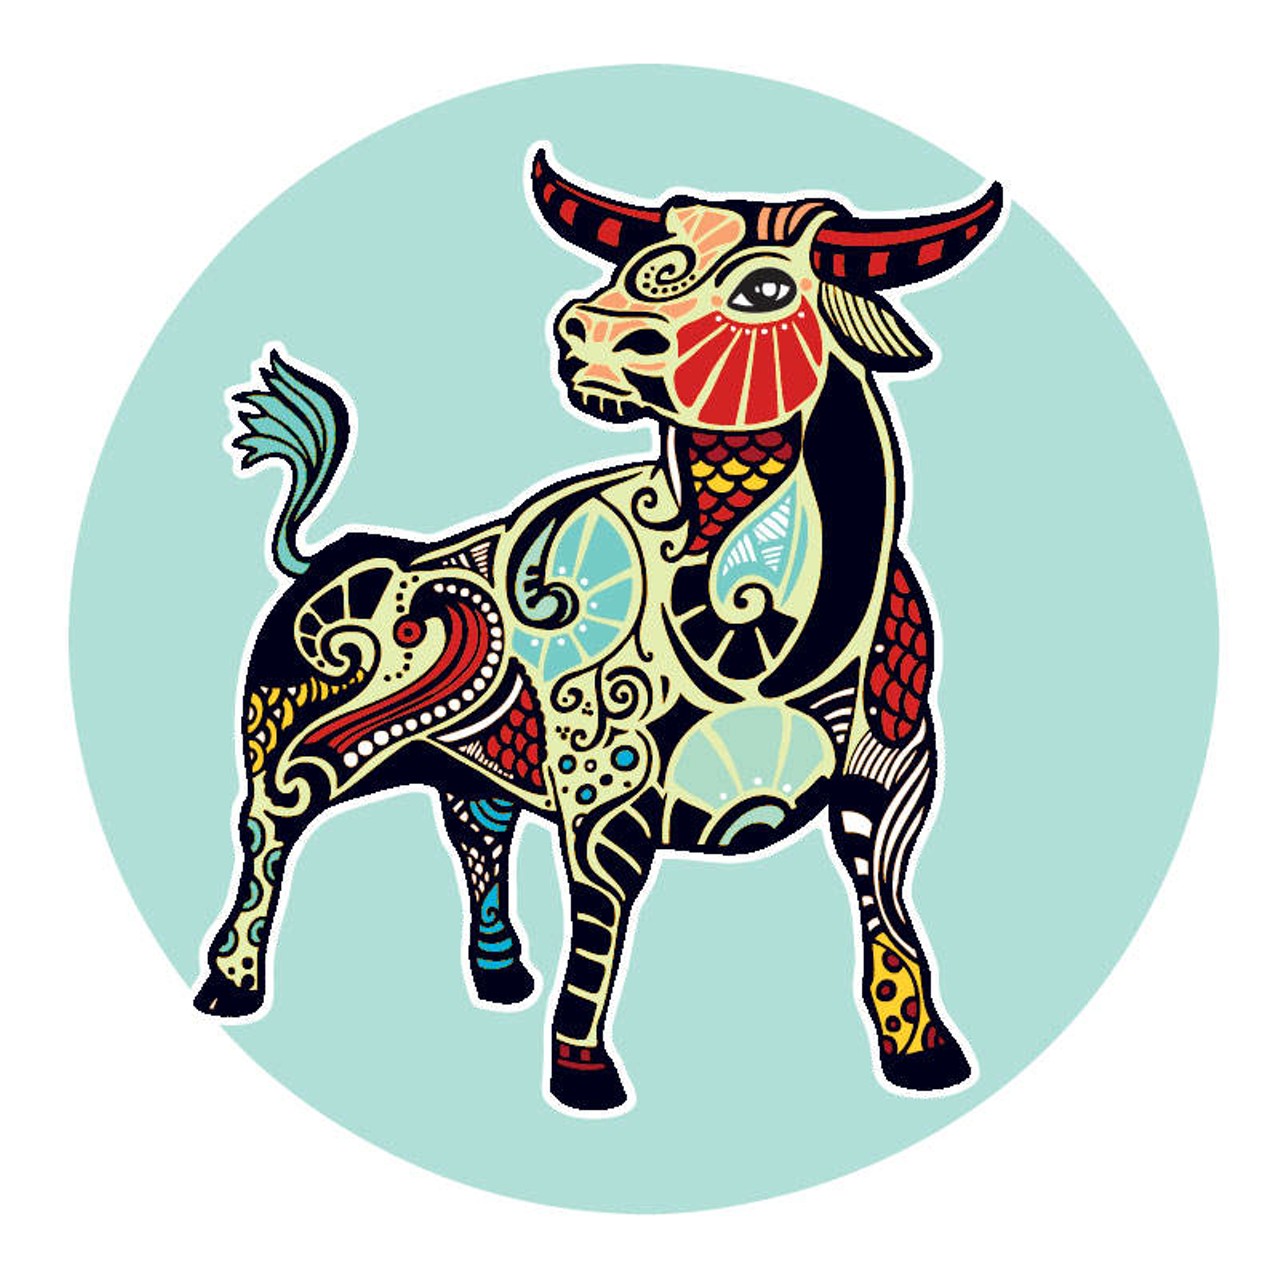 TAURUS (April 21 -May 20): 
The next time you decide to bite off more than you can chew, you might want to rethink your situation. Getting in over your head is always a good lesson in how much you can handle, but I don&#146;t know who you&#146;re trying to impress, or what you think it will accomplish. There&#146;s a lot going on, and it looks bad or good, depending on what motivated you to do it in the first place. For some, it&#146;s safe to keep plugging and hold steady. For others? Maybe it&#146;s time to back up, back off, or move in a new direction, because wherever you&#146;re going, you can&#146;t get there from here.